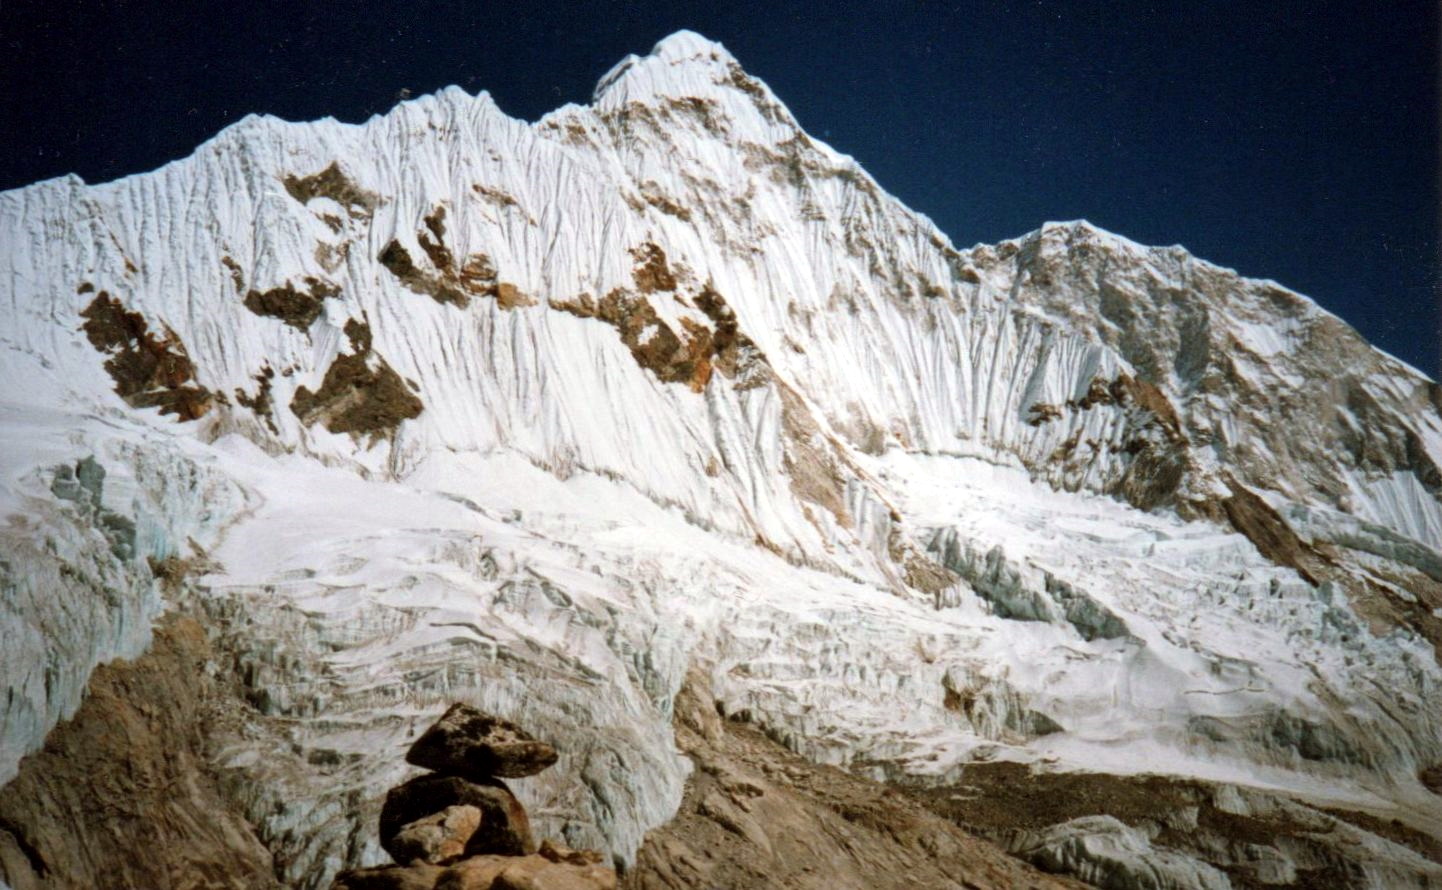 Mount Baruntse ( 7129m ) from above the Panch Pokhari at the head of the Hongu Valley